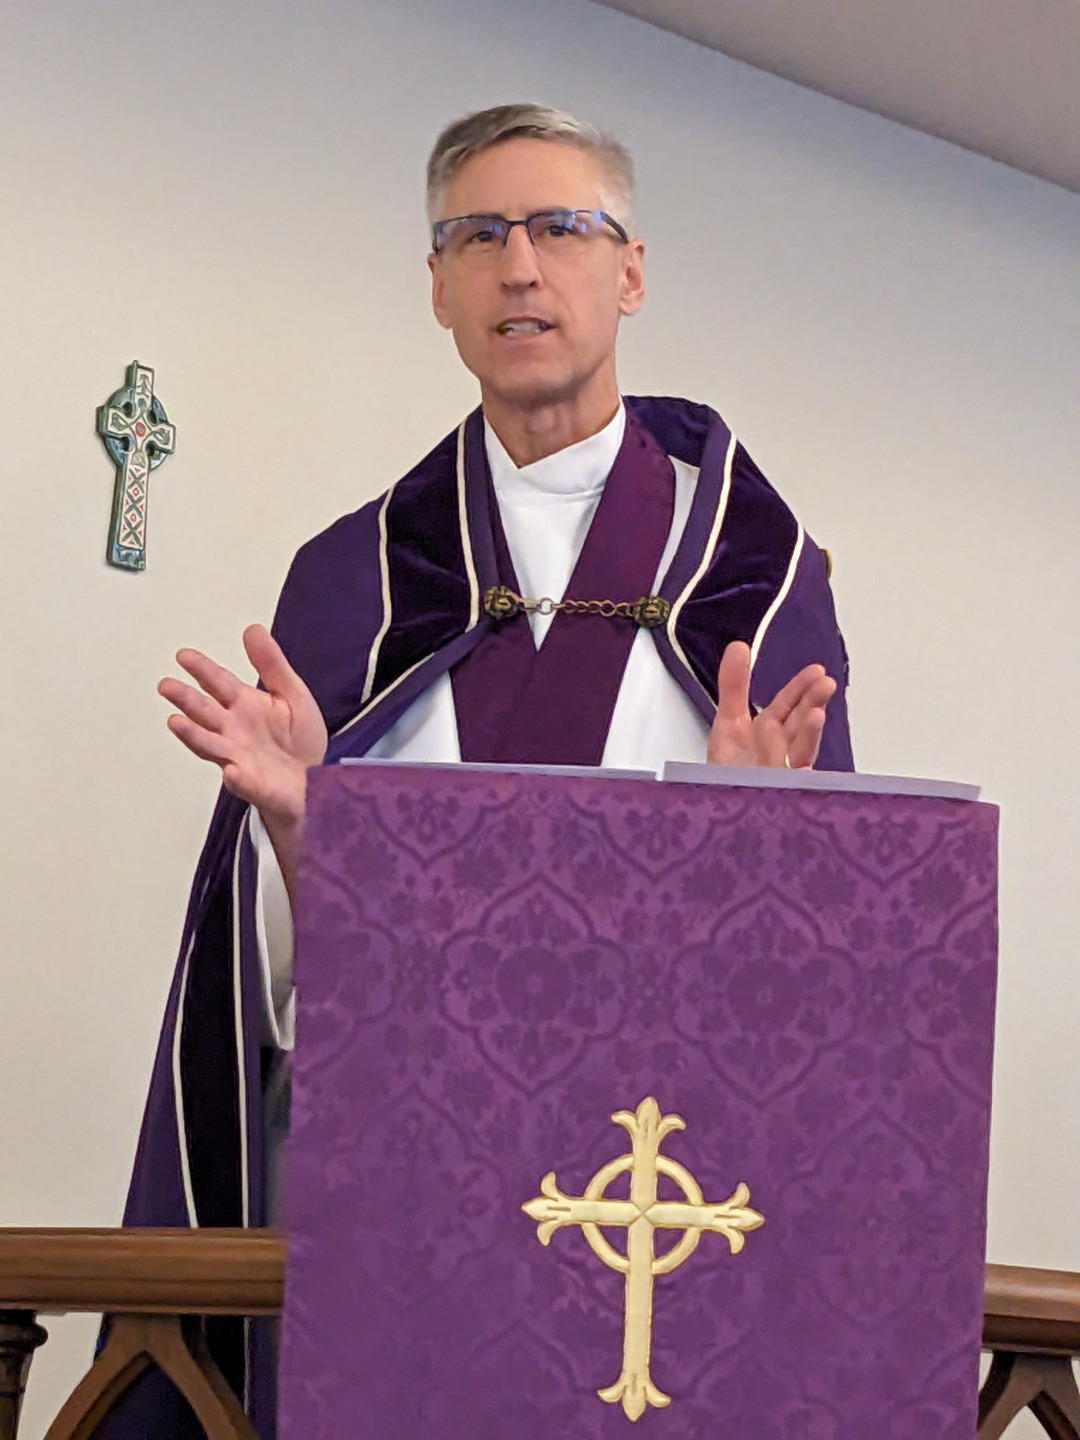 The Rev. Mark Brooks, Curate